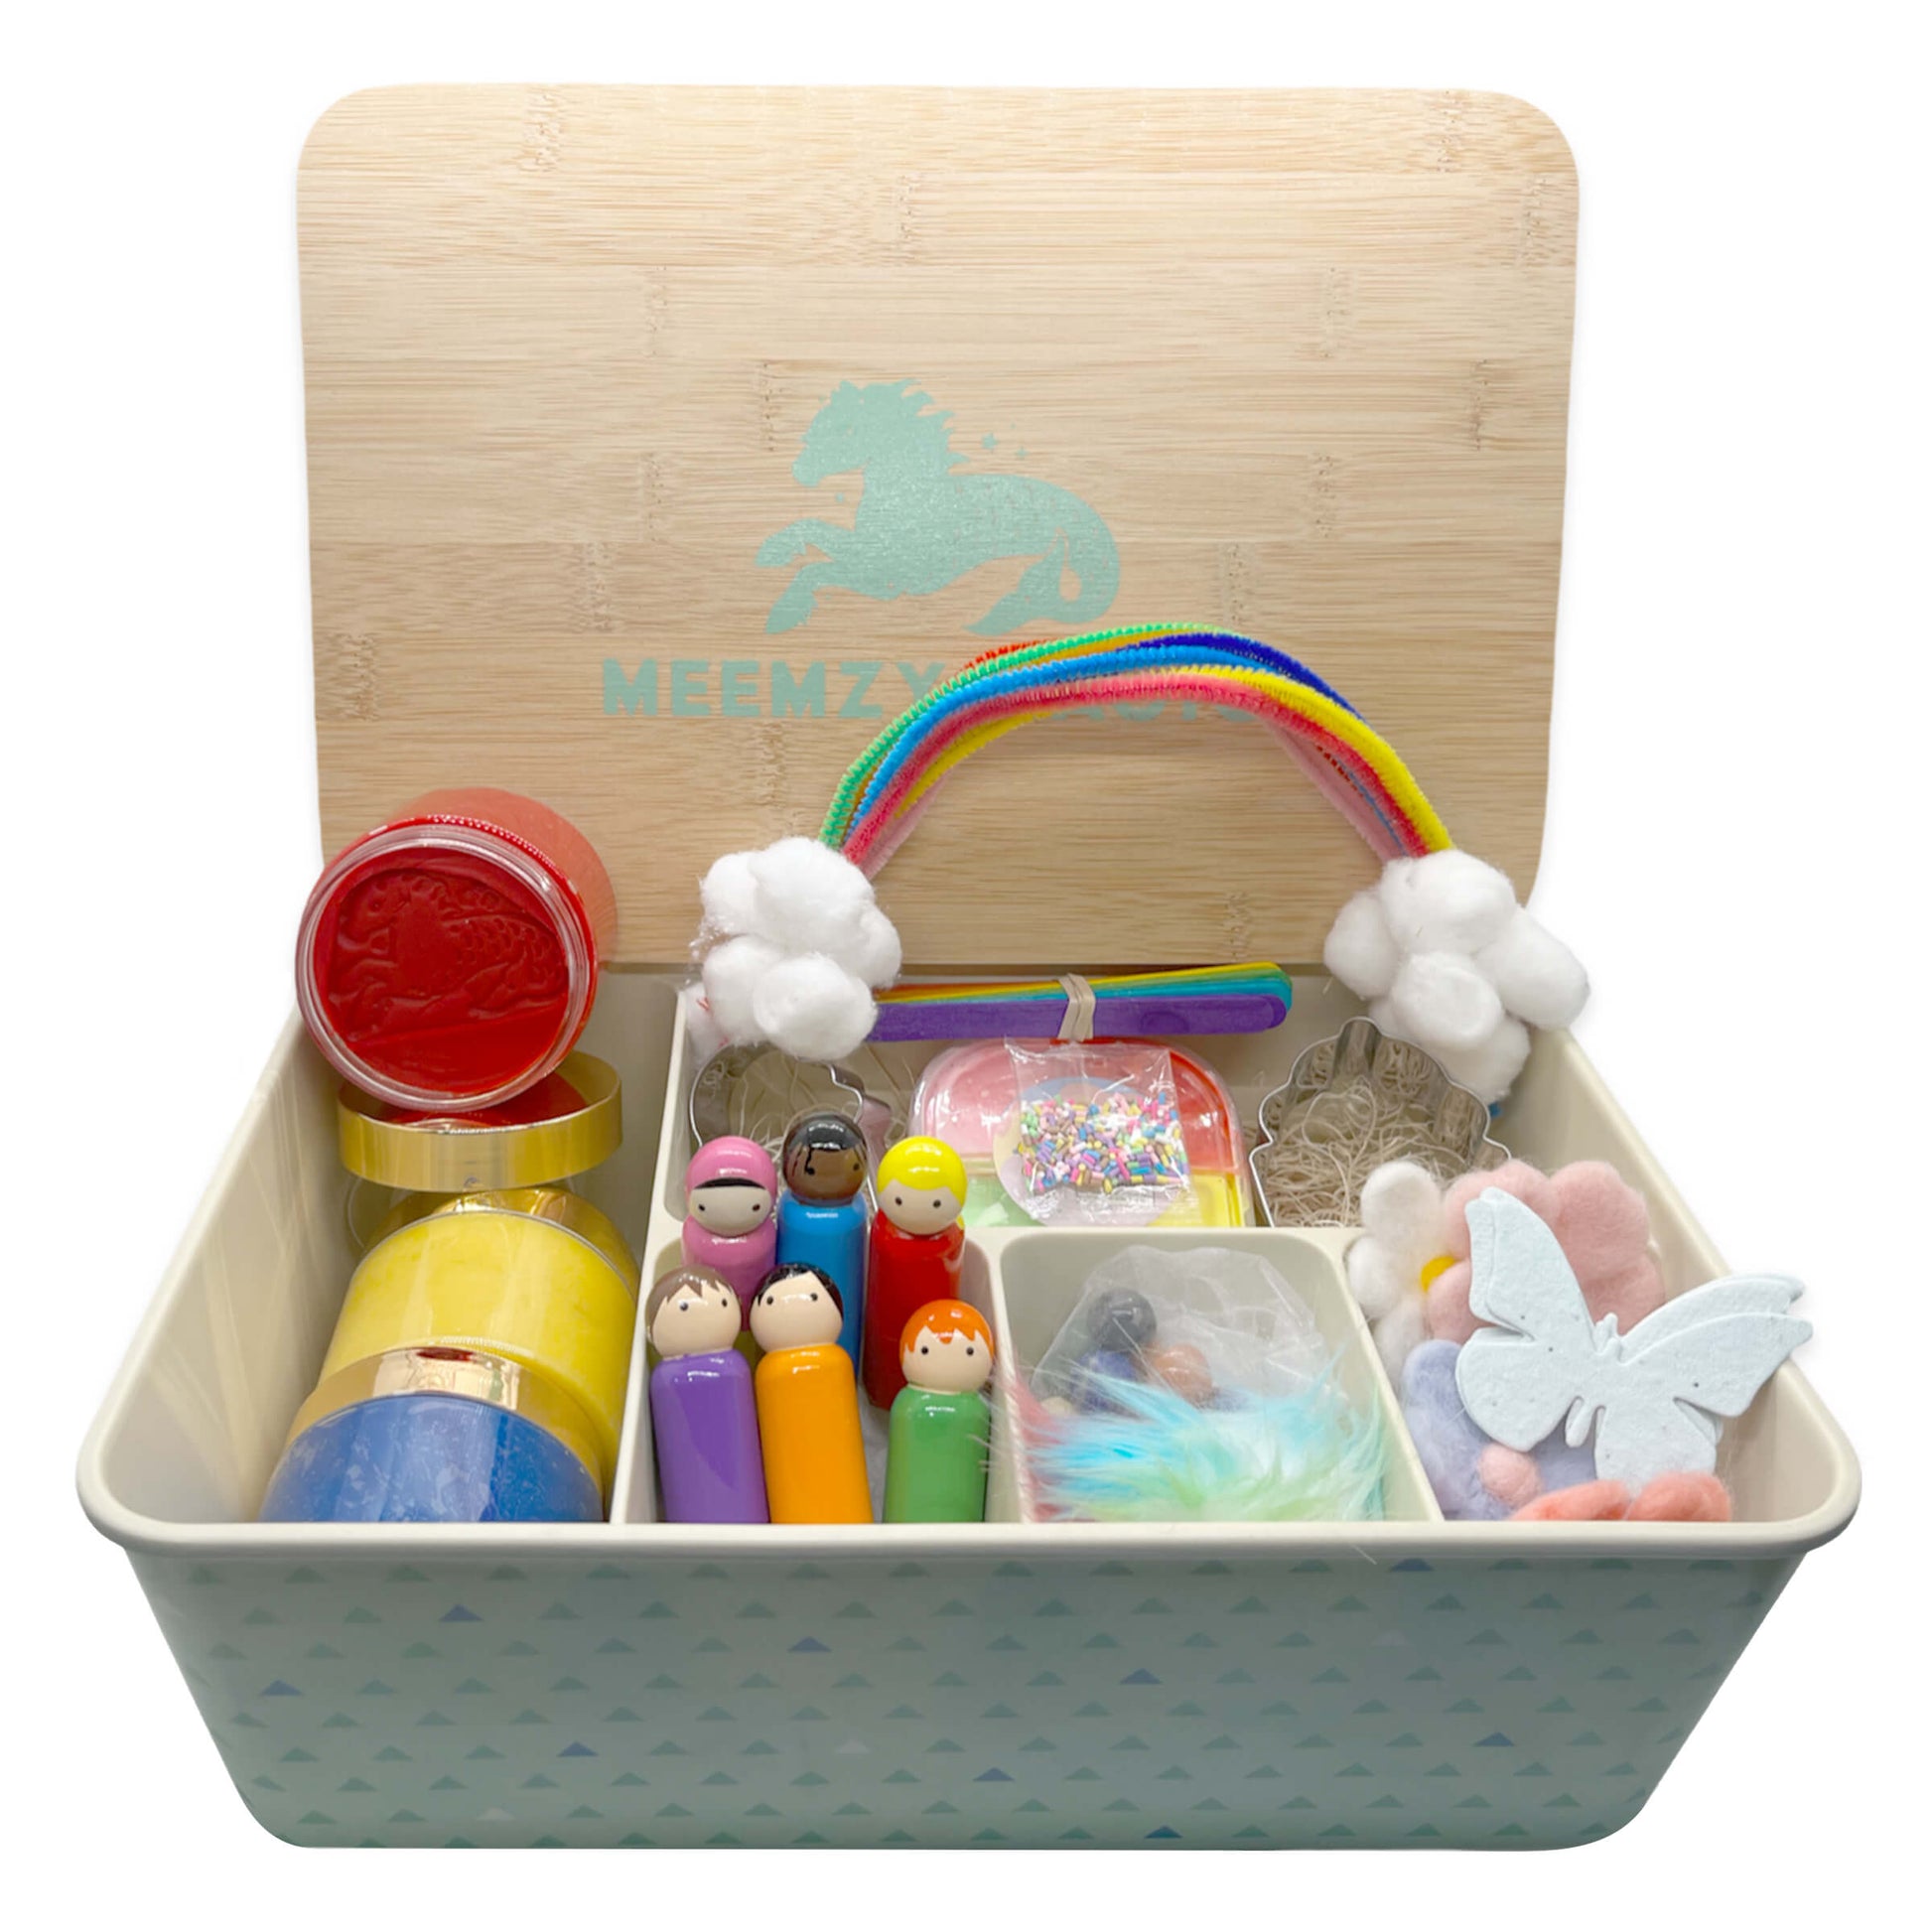 Rainbow Celebration sensory kit in it's box with contents including cotton ball clouds, rainbow pipe cleaners, a variety of colorful play dough, pegs dolls of various colors, and felt flowers and butterflies